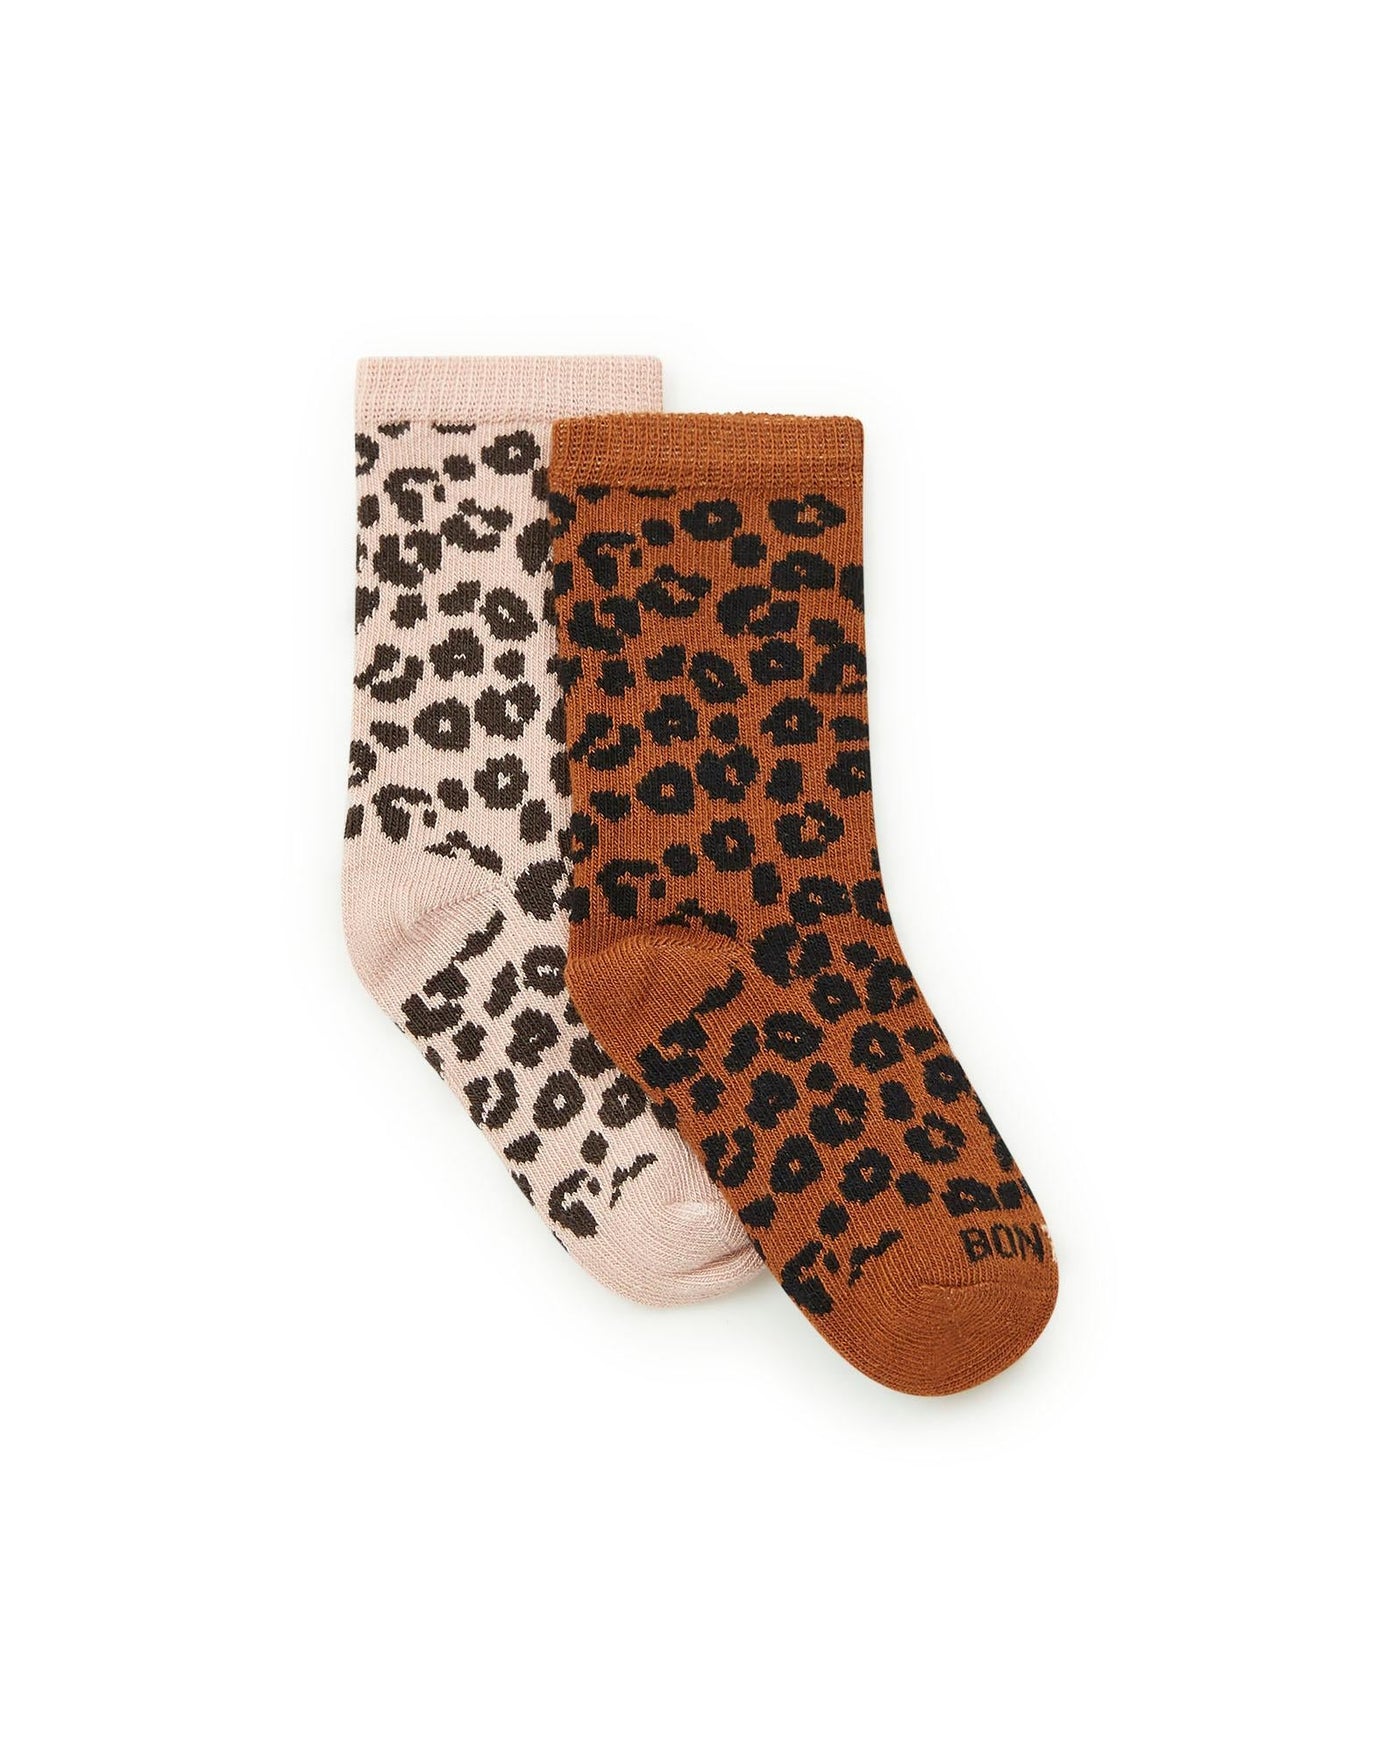 Pack of Two Socks in Leopard Rose